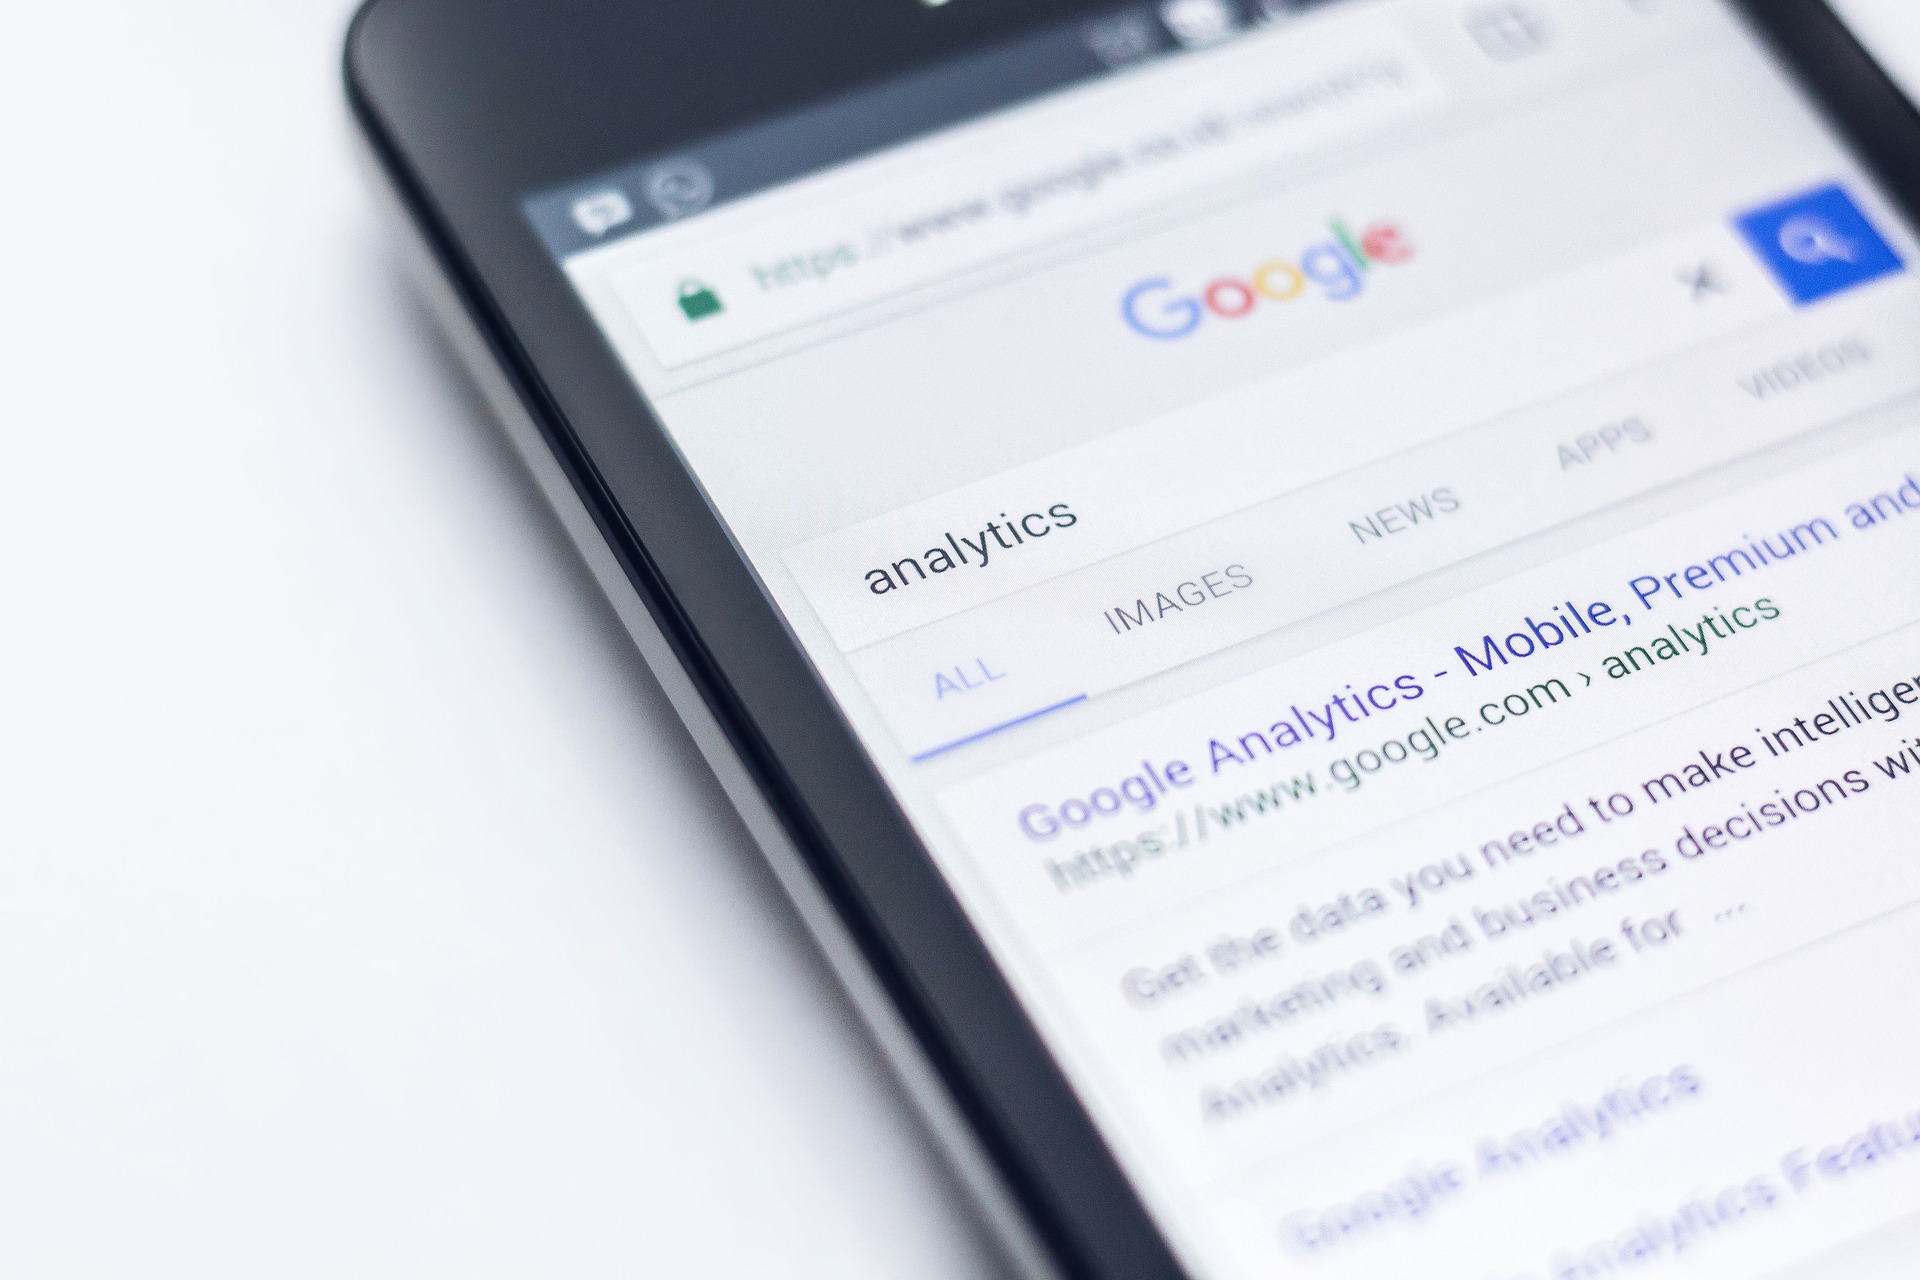 Mobile Marketing for Business in 2019 – SEO or SEM